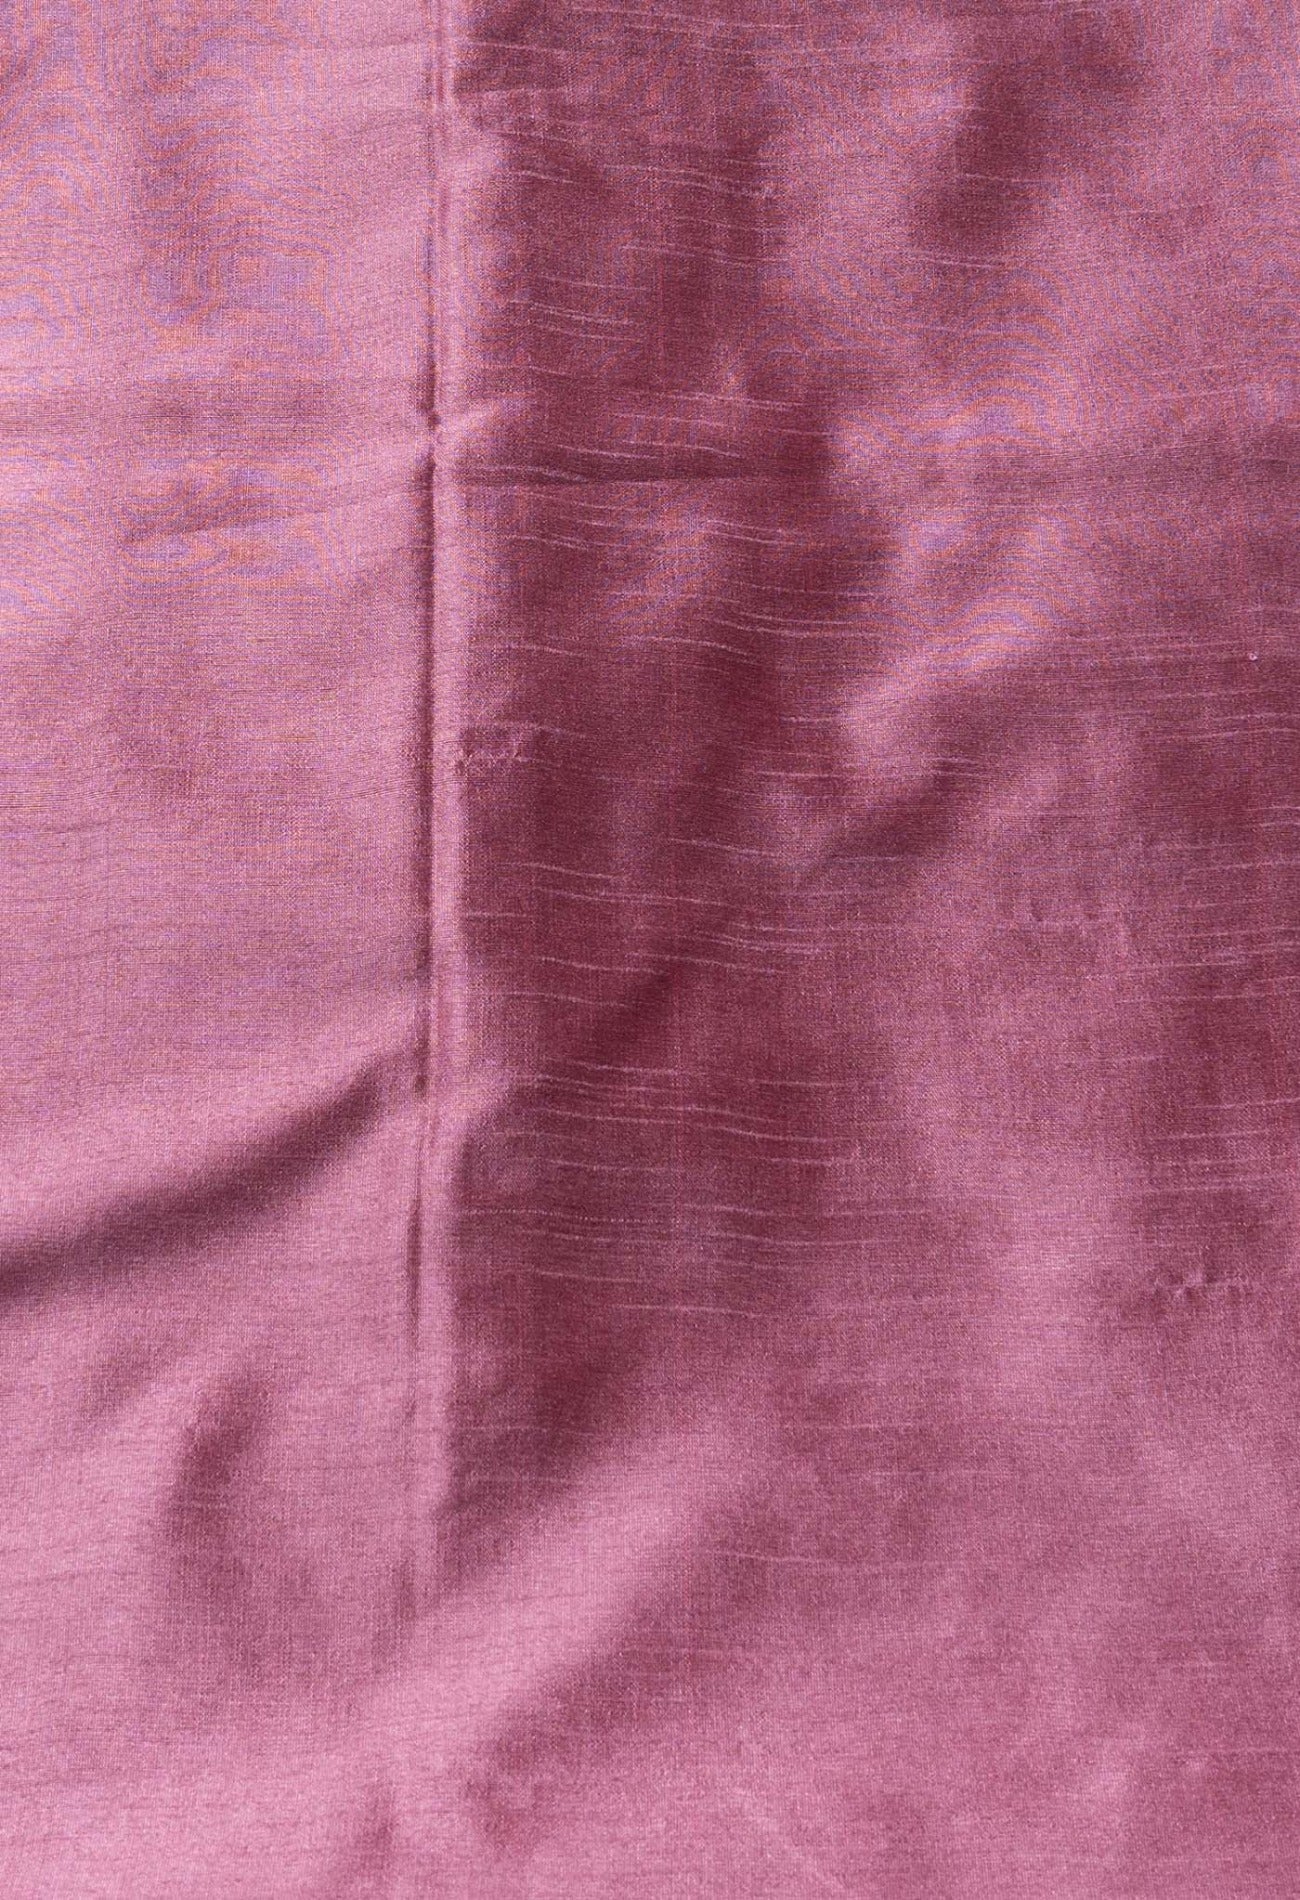 Online Shopping for Pink  Dupion  Silk Saree with Weaving from West Bengal at Unnatisilks.com India
